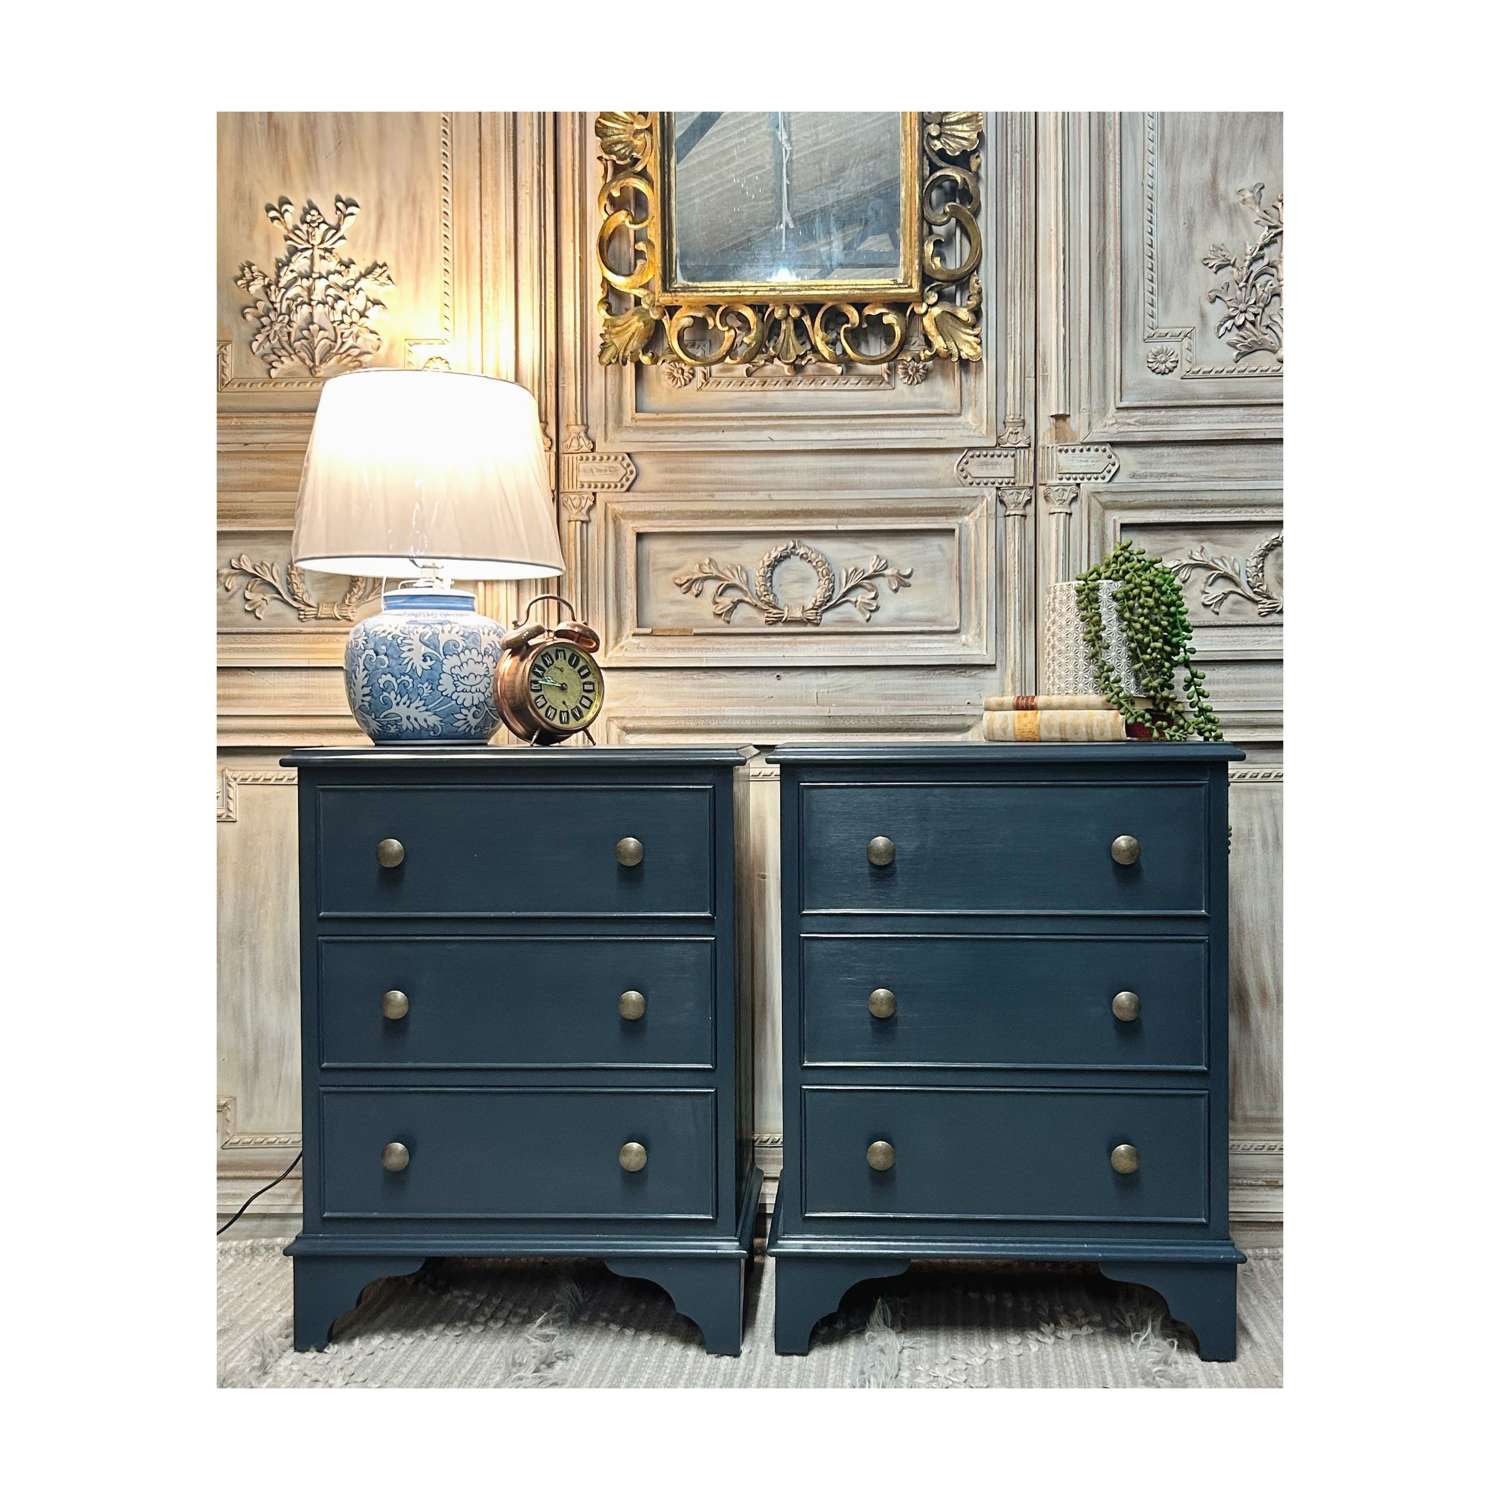 Pair of Bedside Tables, Bedside Chests in Railings by Farrow and Ball